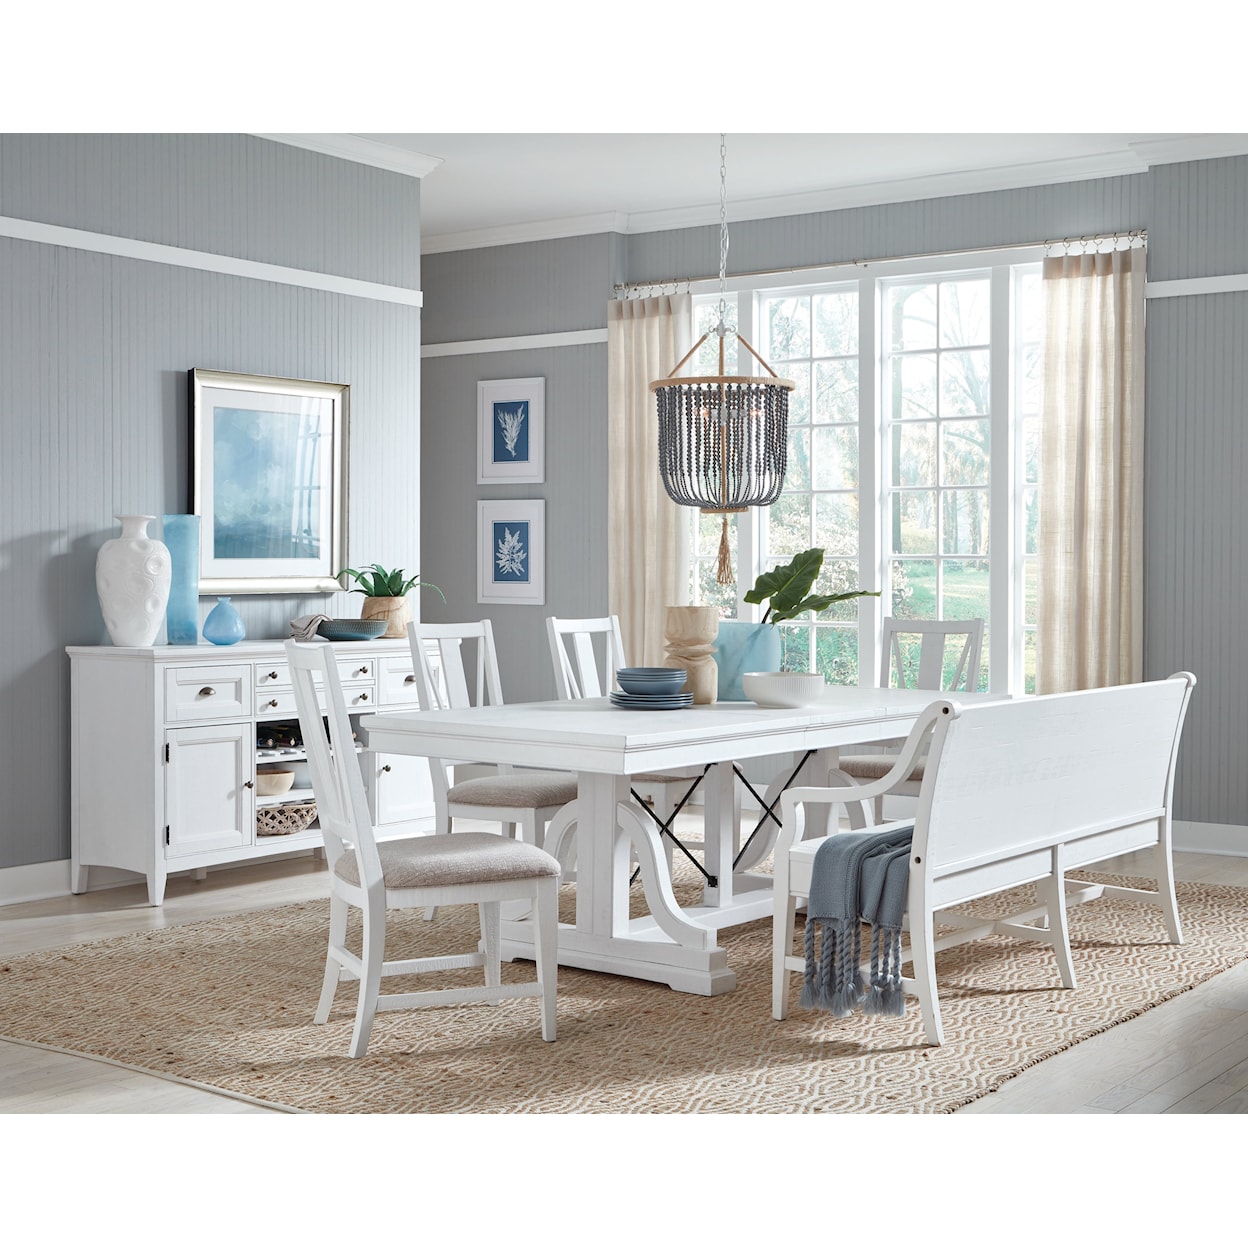 Magnussen Home Heron Cove Dining Dining Set with Bench